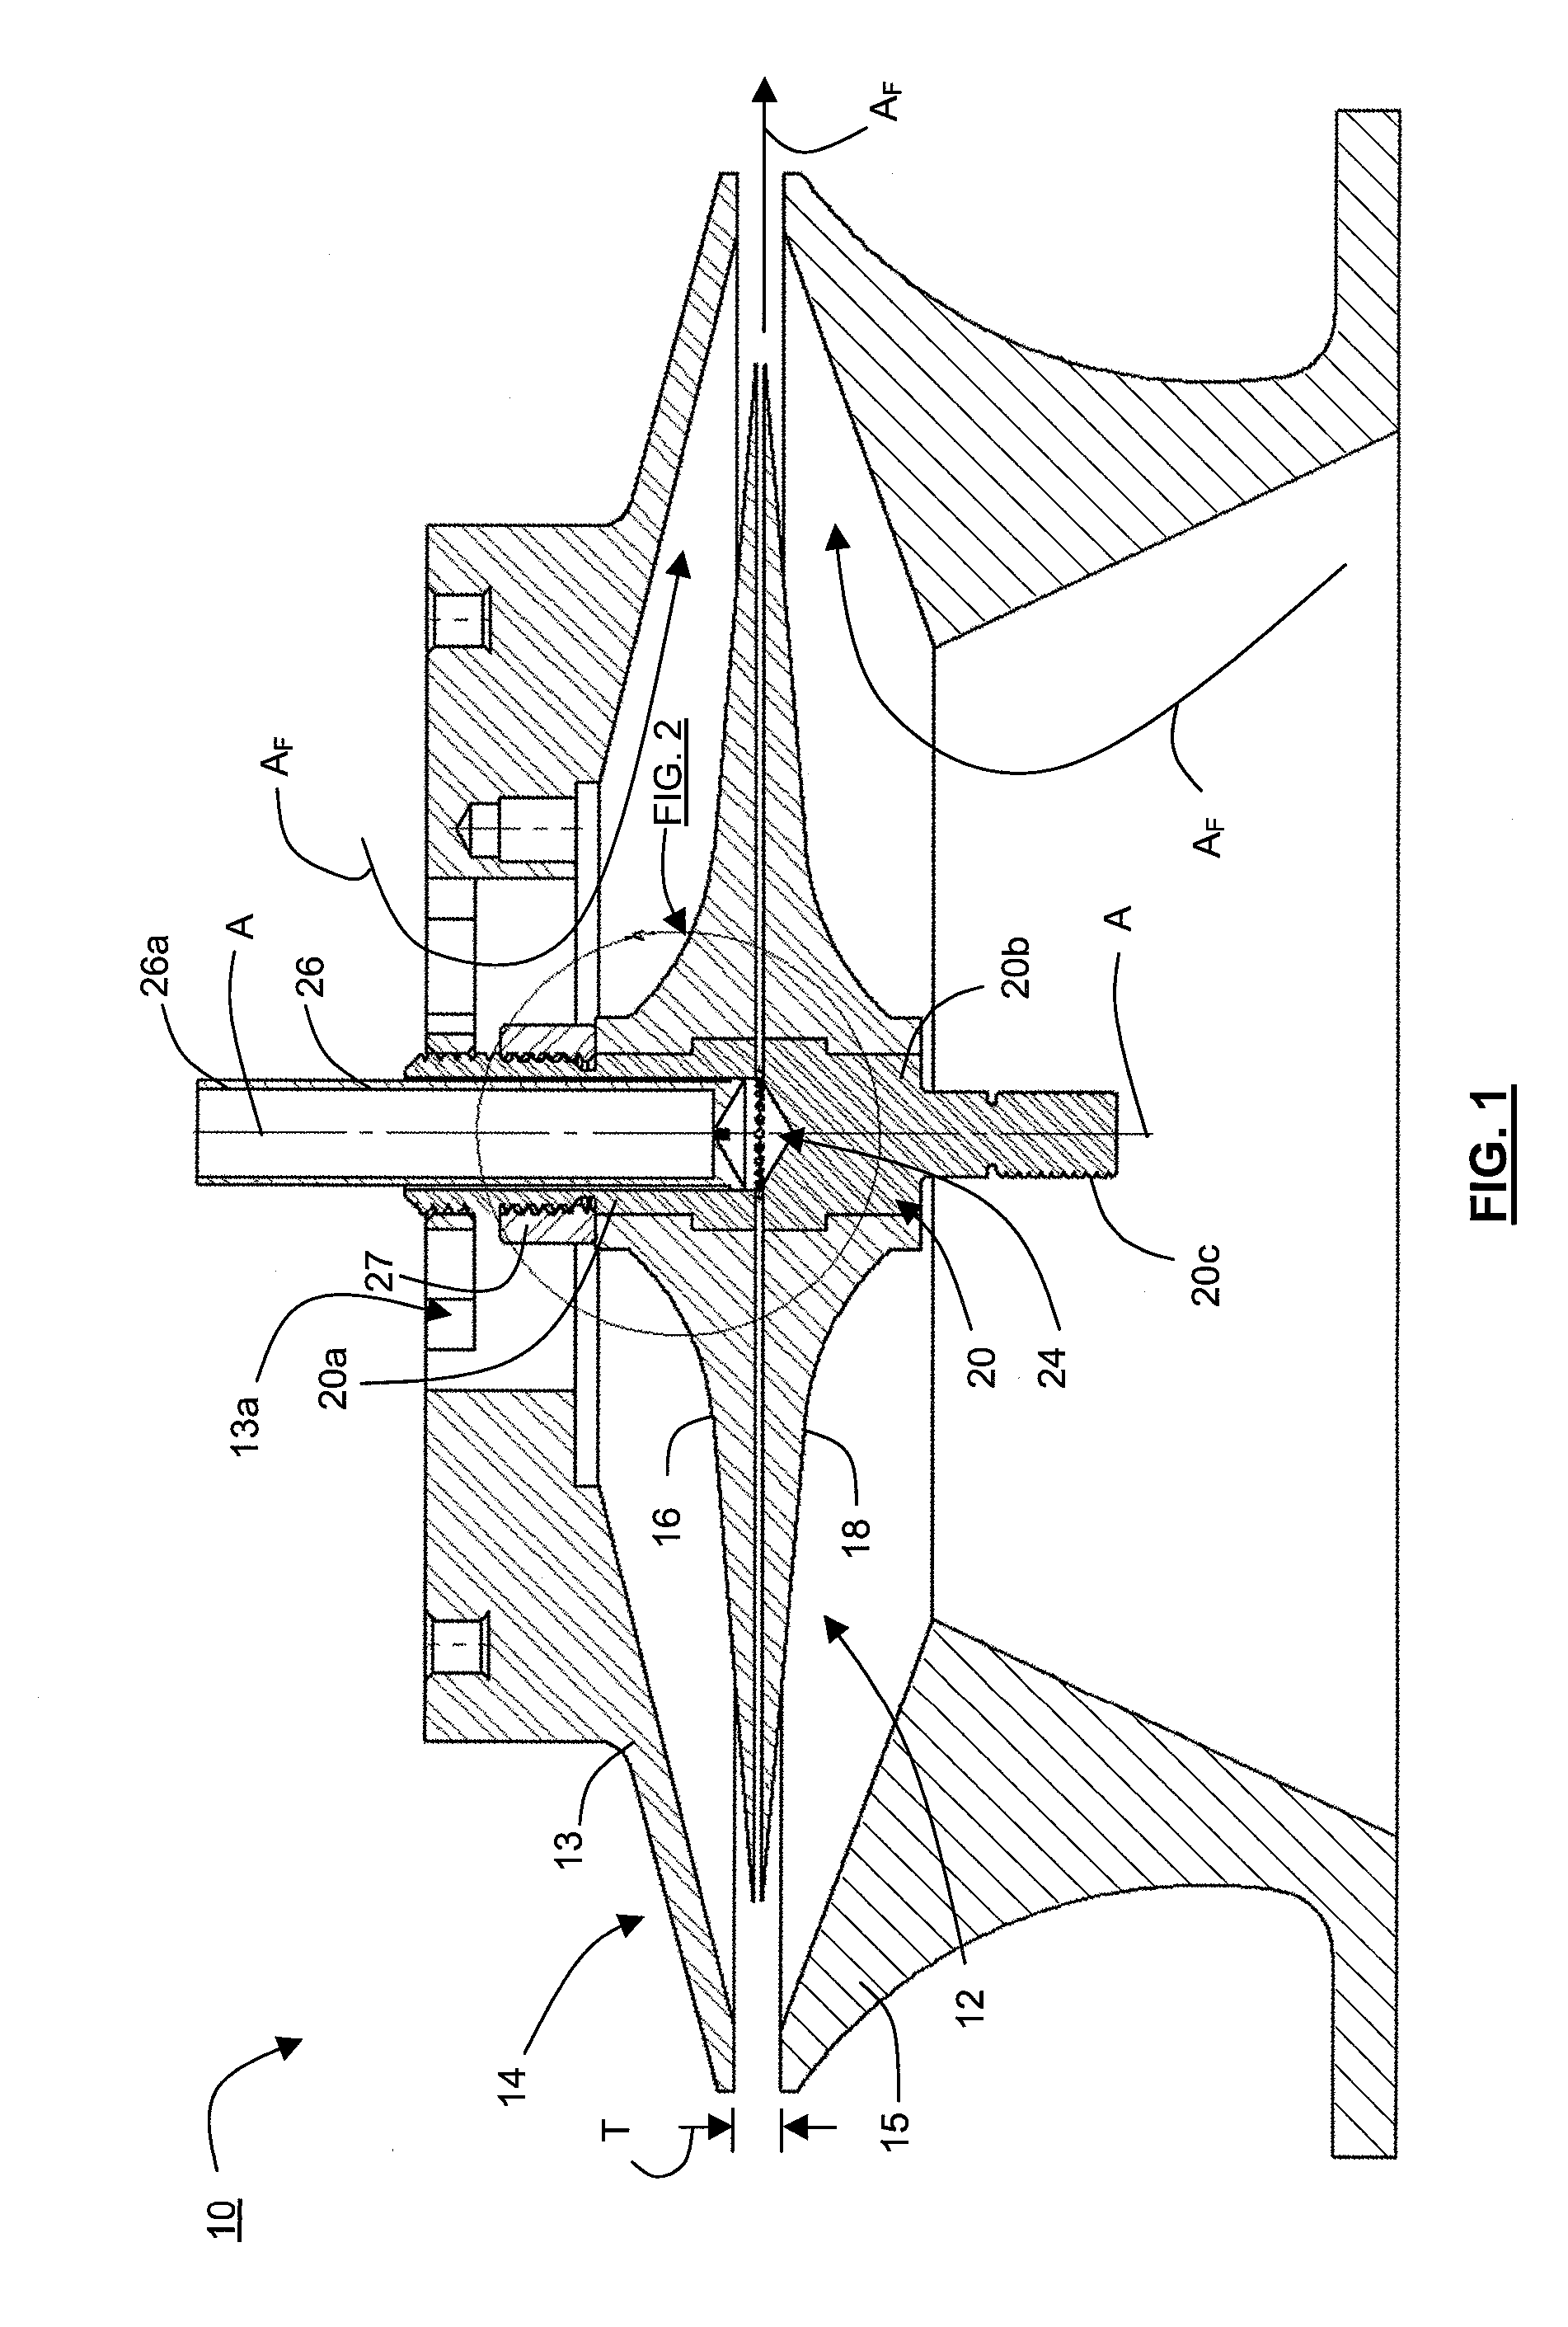 Apparatus, systems and methods for producing particles using rotating capillaries